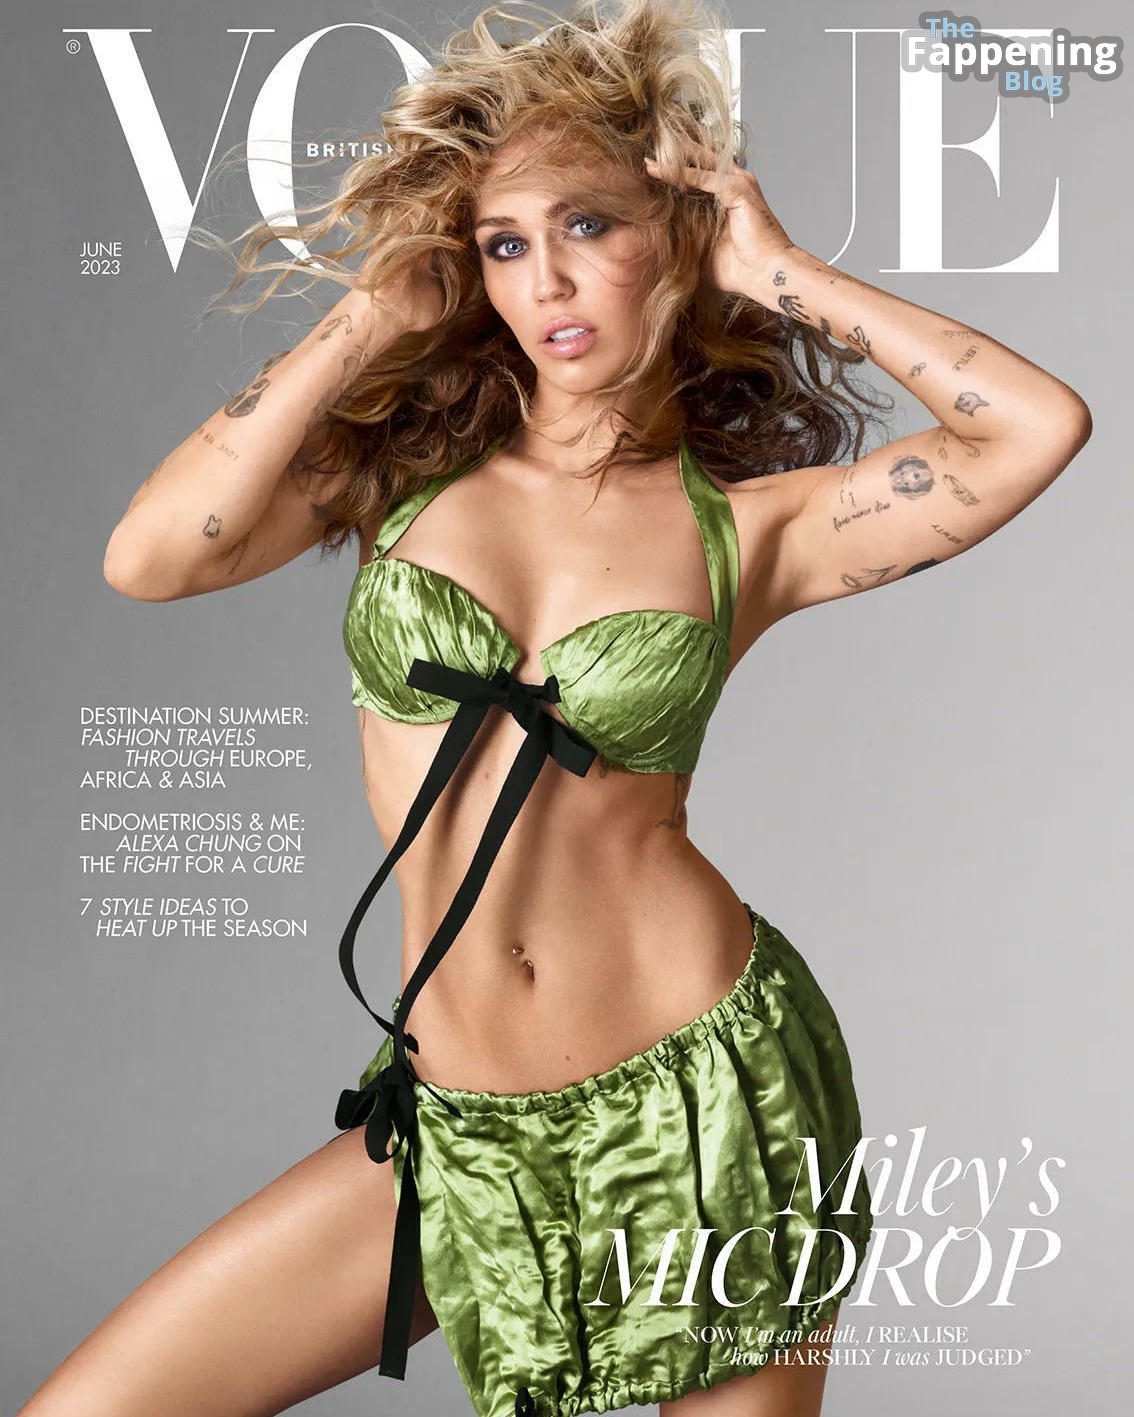 miley-cyrus-vogue-magazine-june-2023-sultry-glamour-1-thefappeningblog.com_.jpg